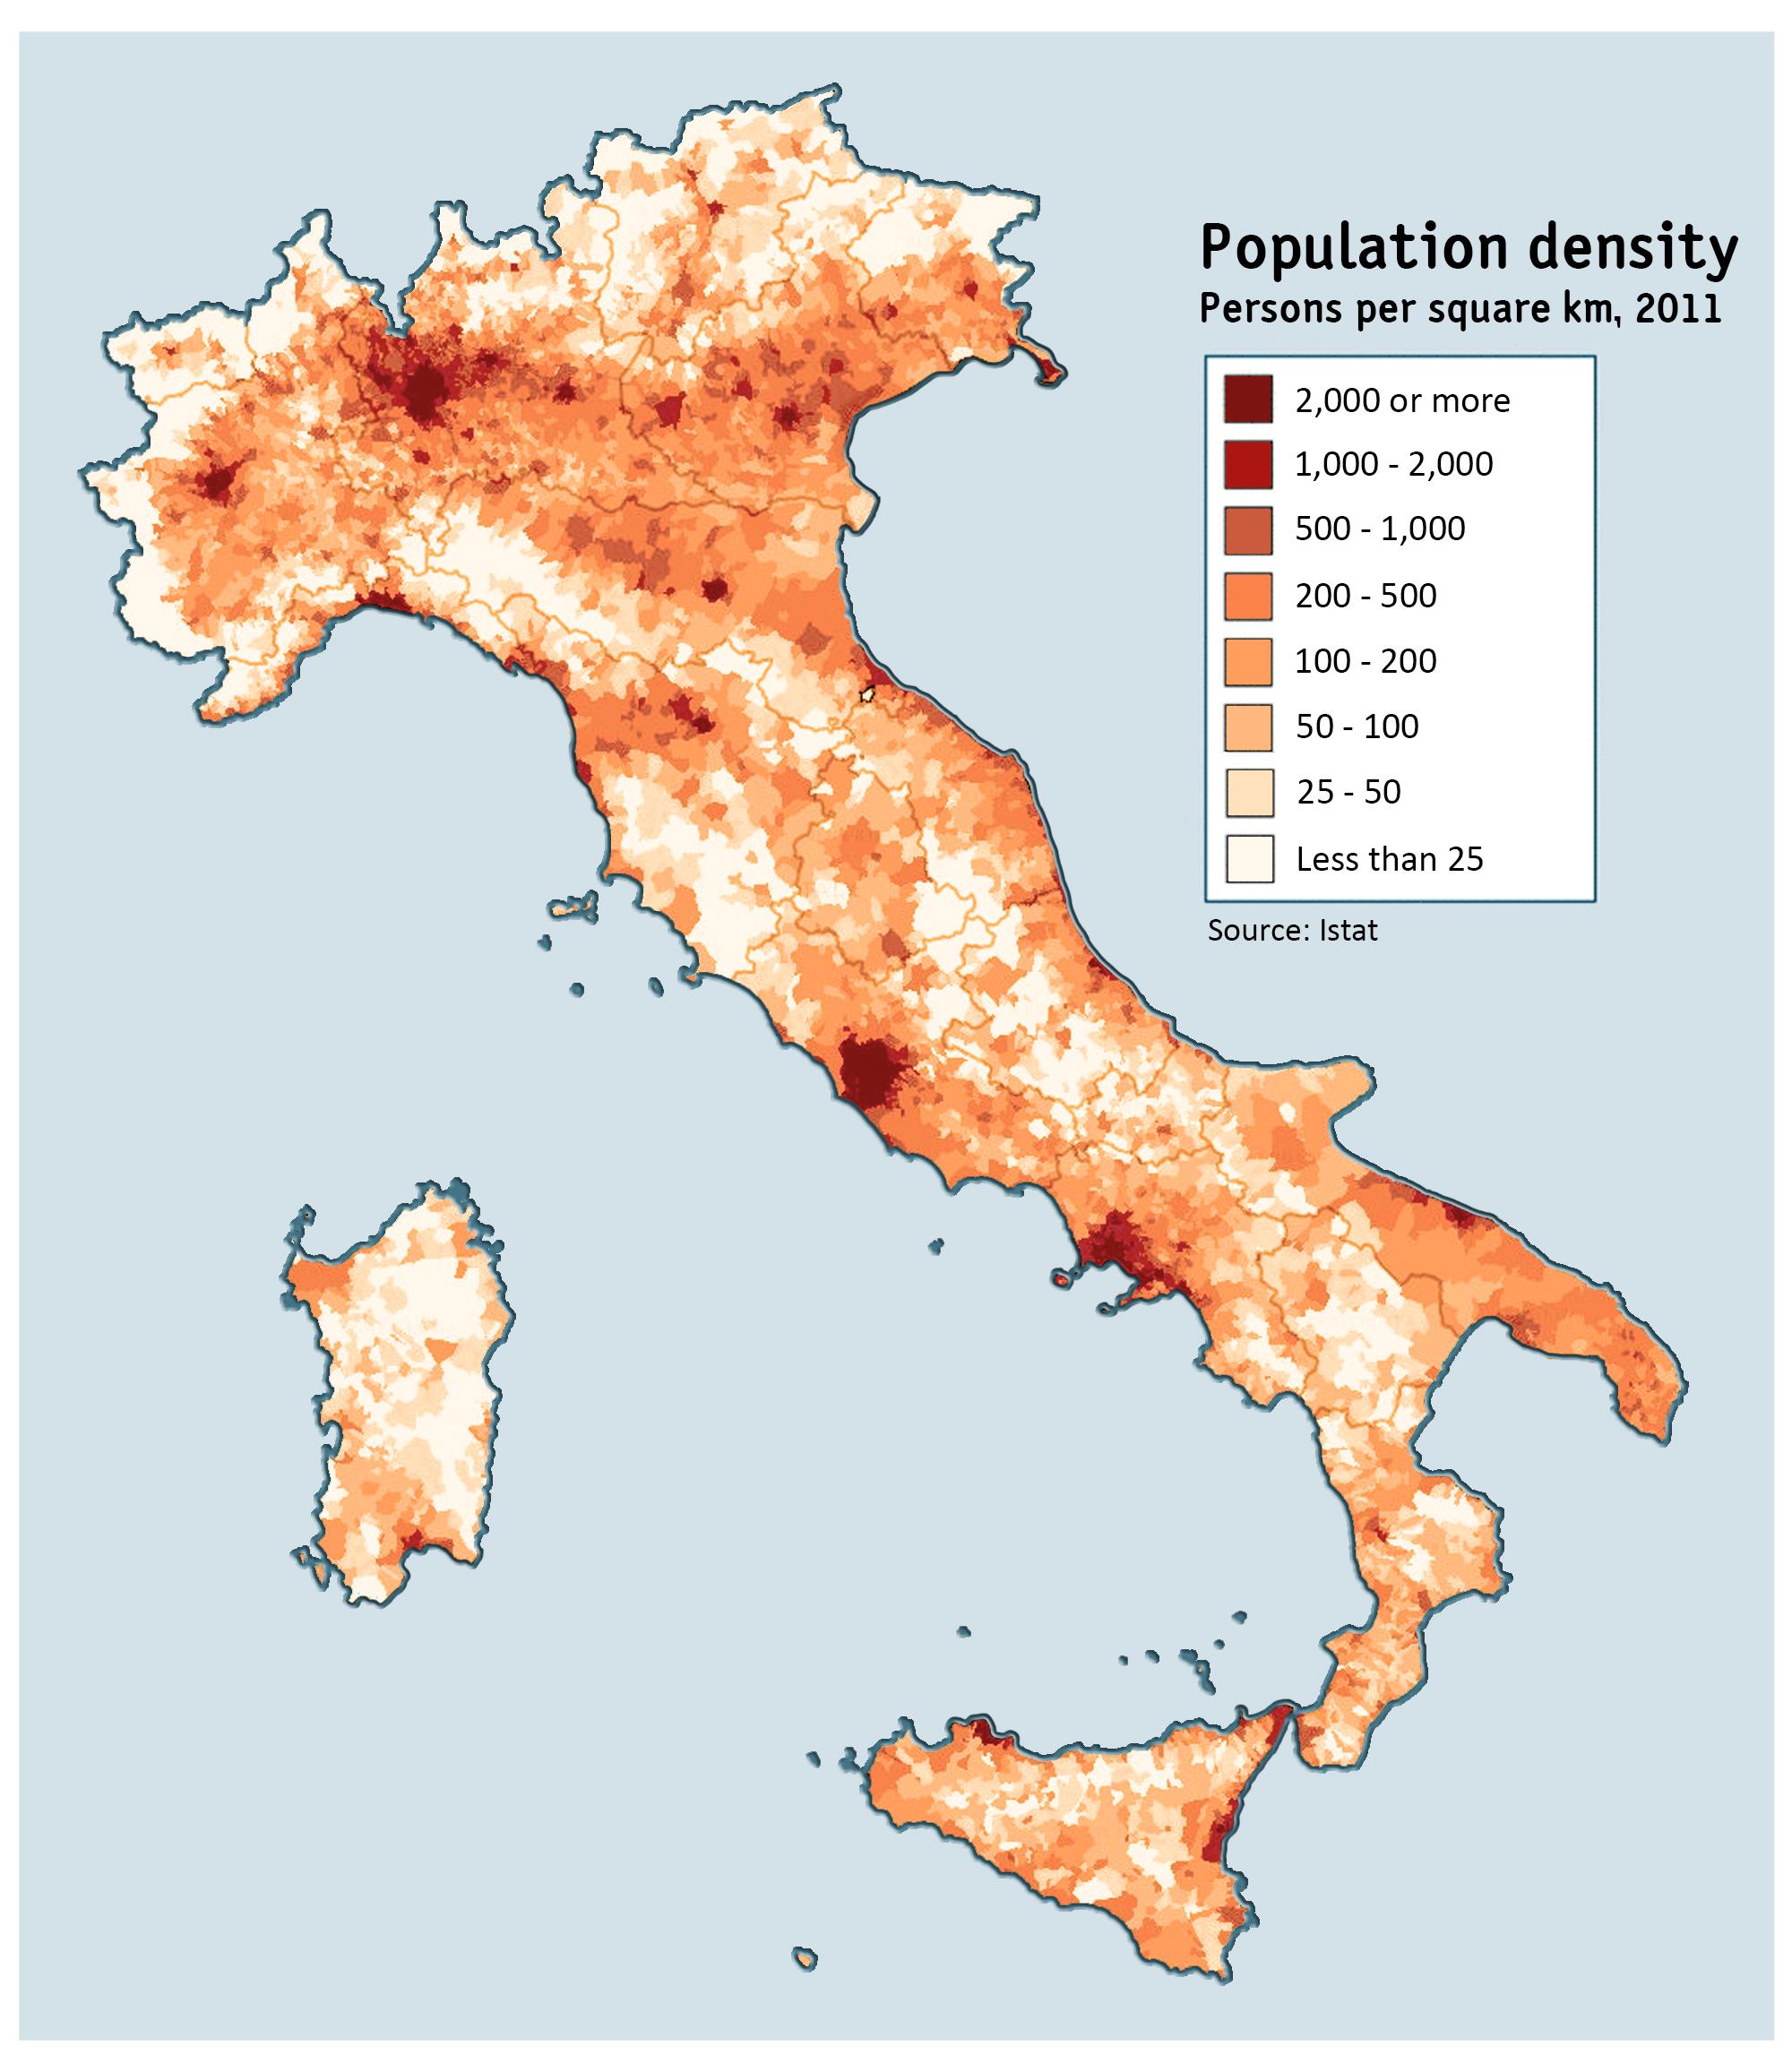 Map of Italy population population density and structure of population